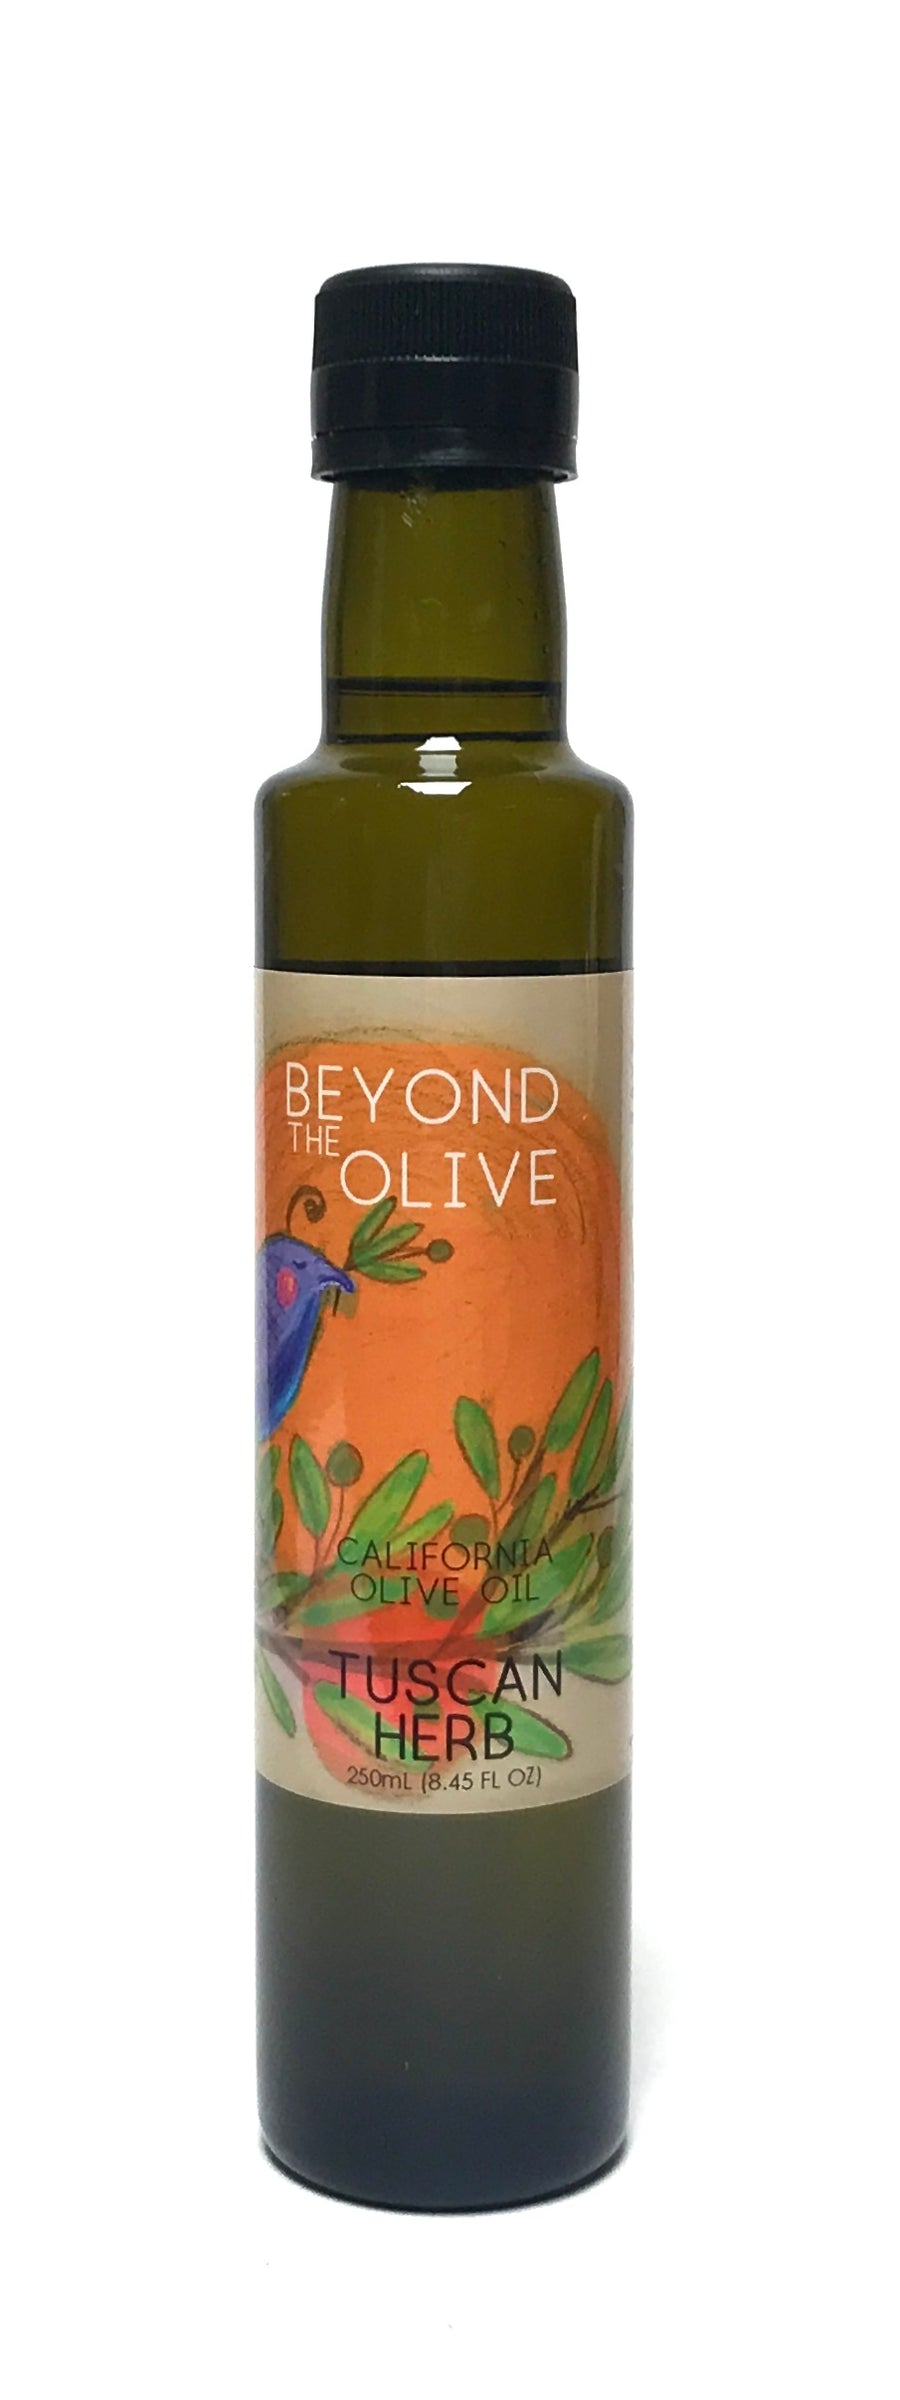 Beyond the Olive Tuscan Herb Olive Oil 250ml